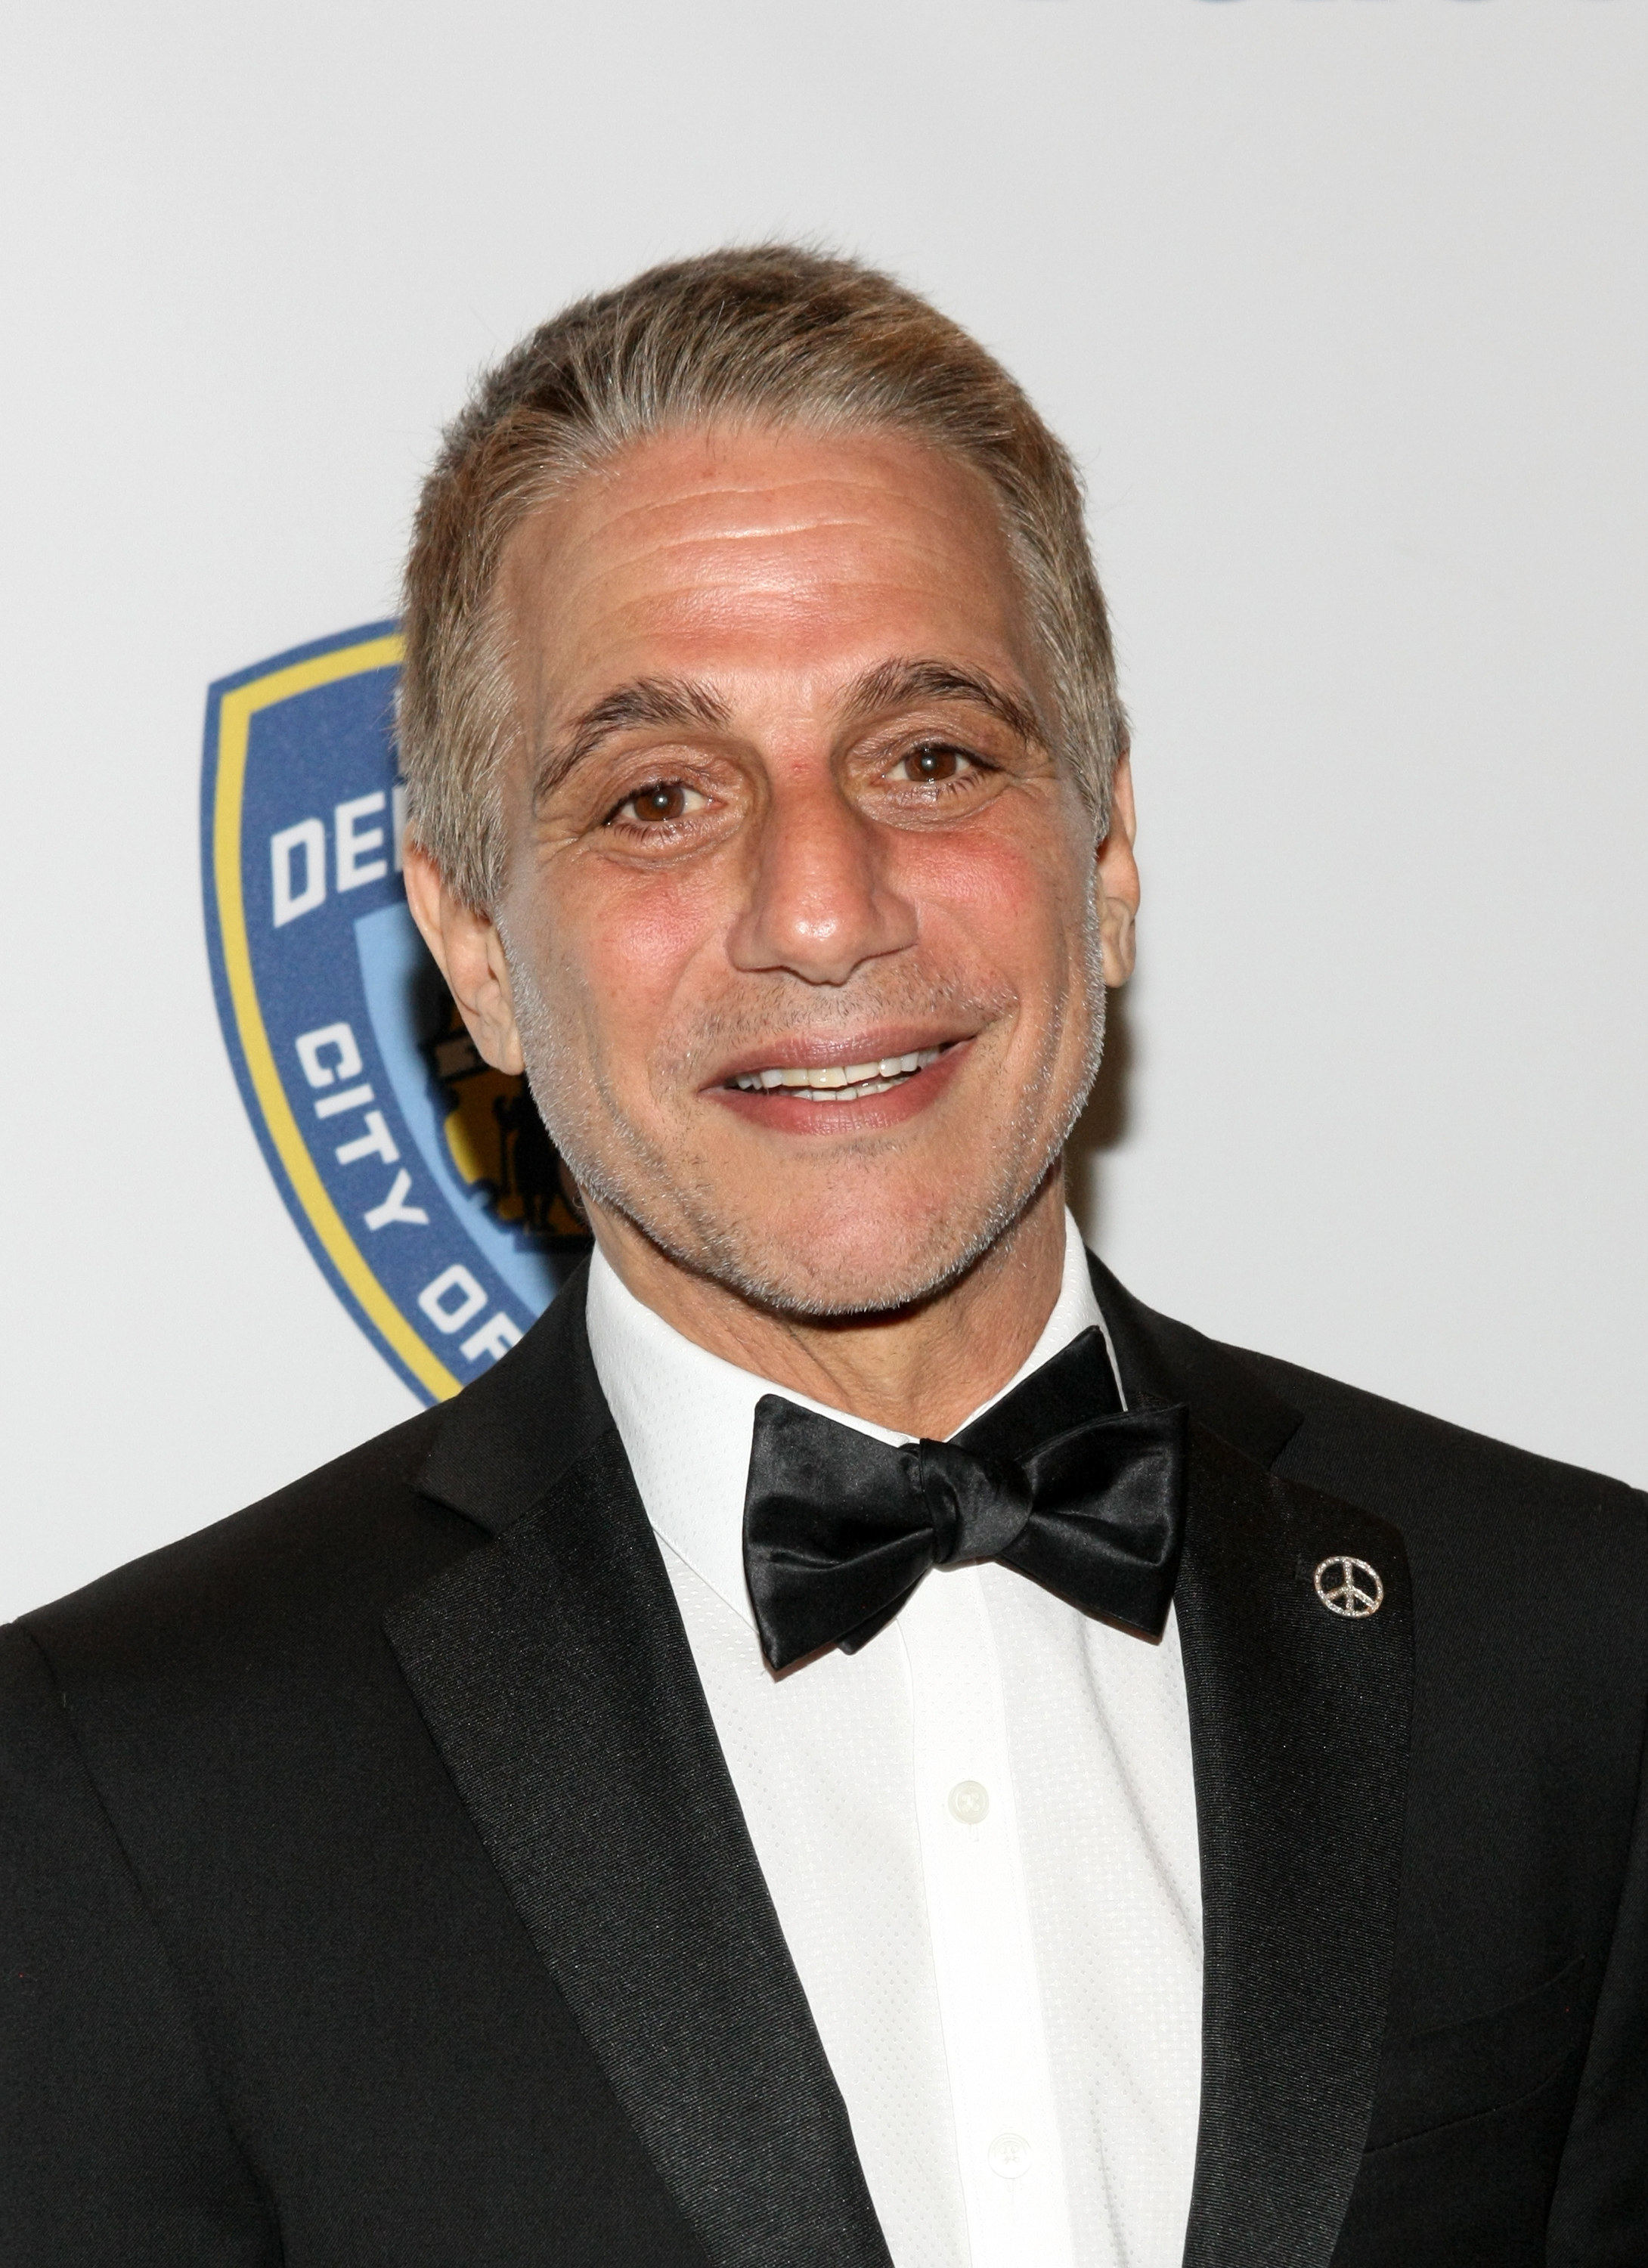 Tony Danza wears a tux and smiles